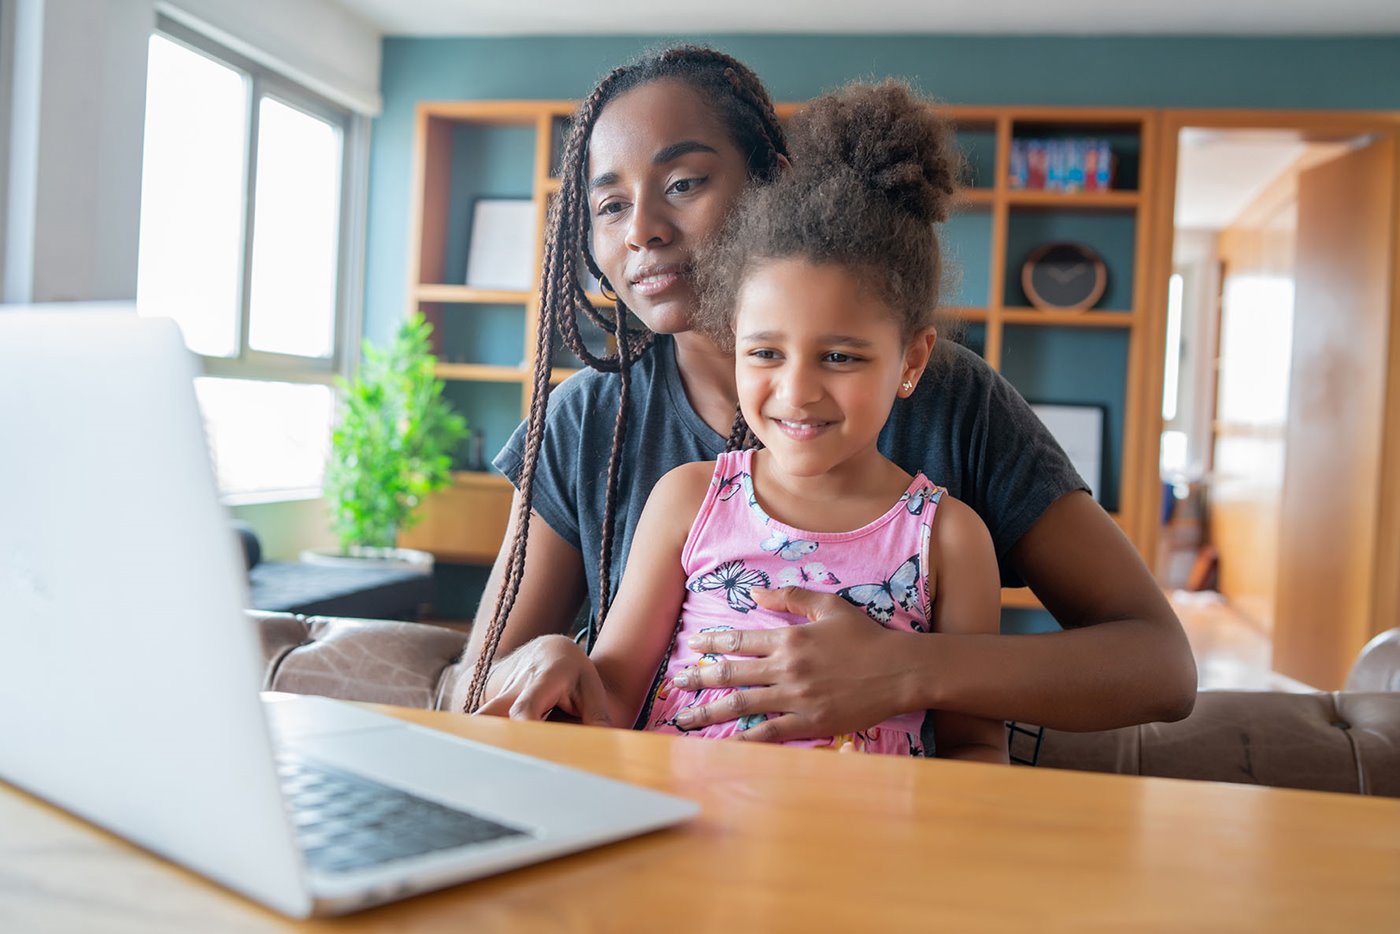 A young girl sits on her mom's lap while looking at a laptop